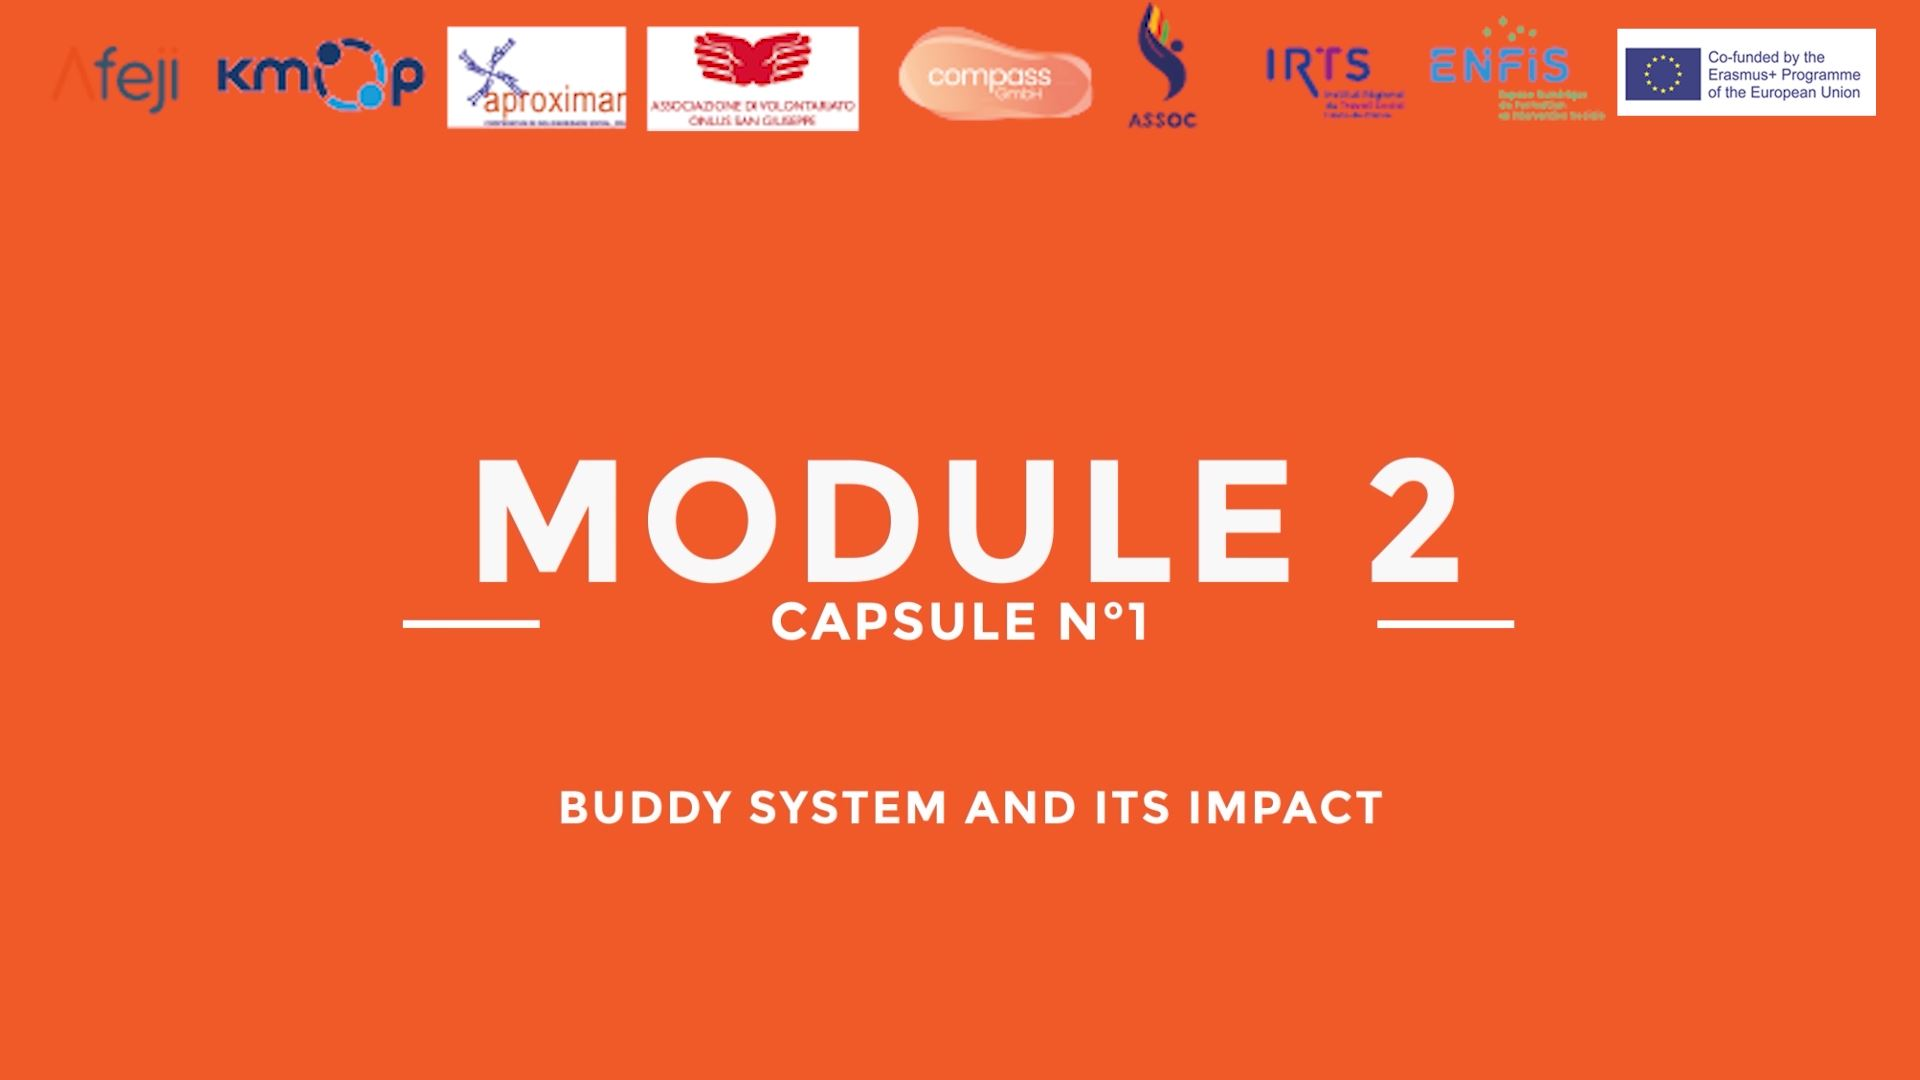 M4M - Module 2 Capsule 1 - Buddy system and its impact